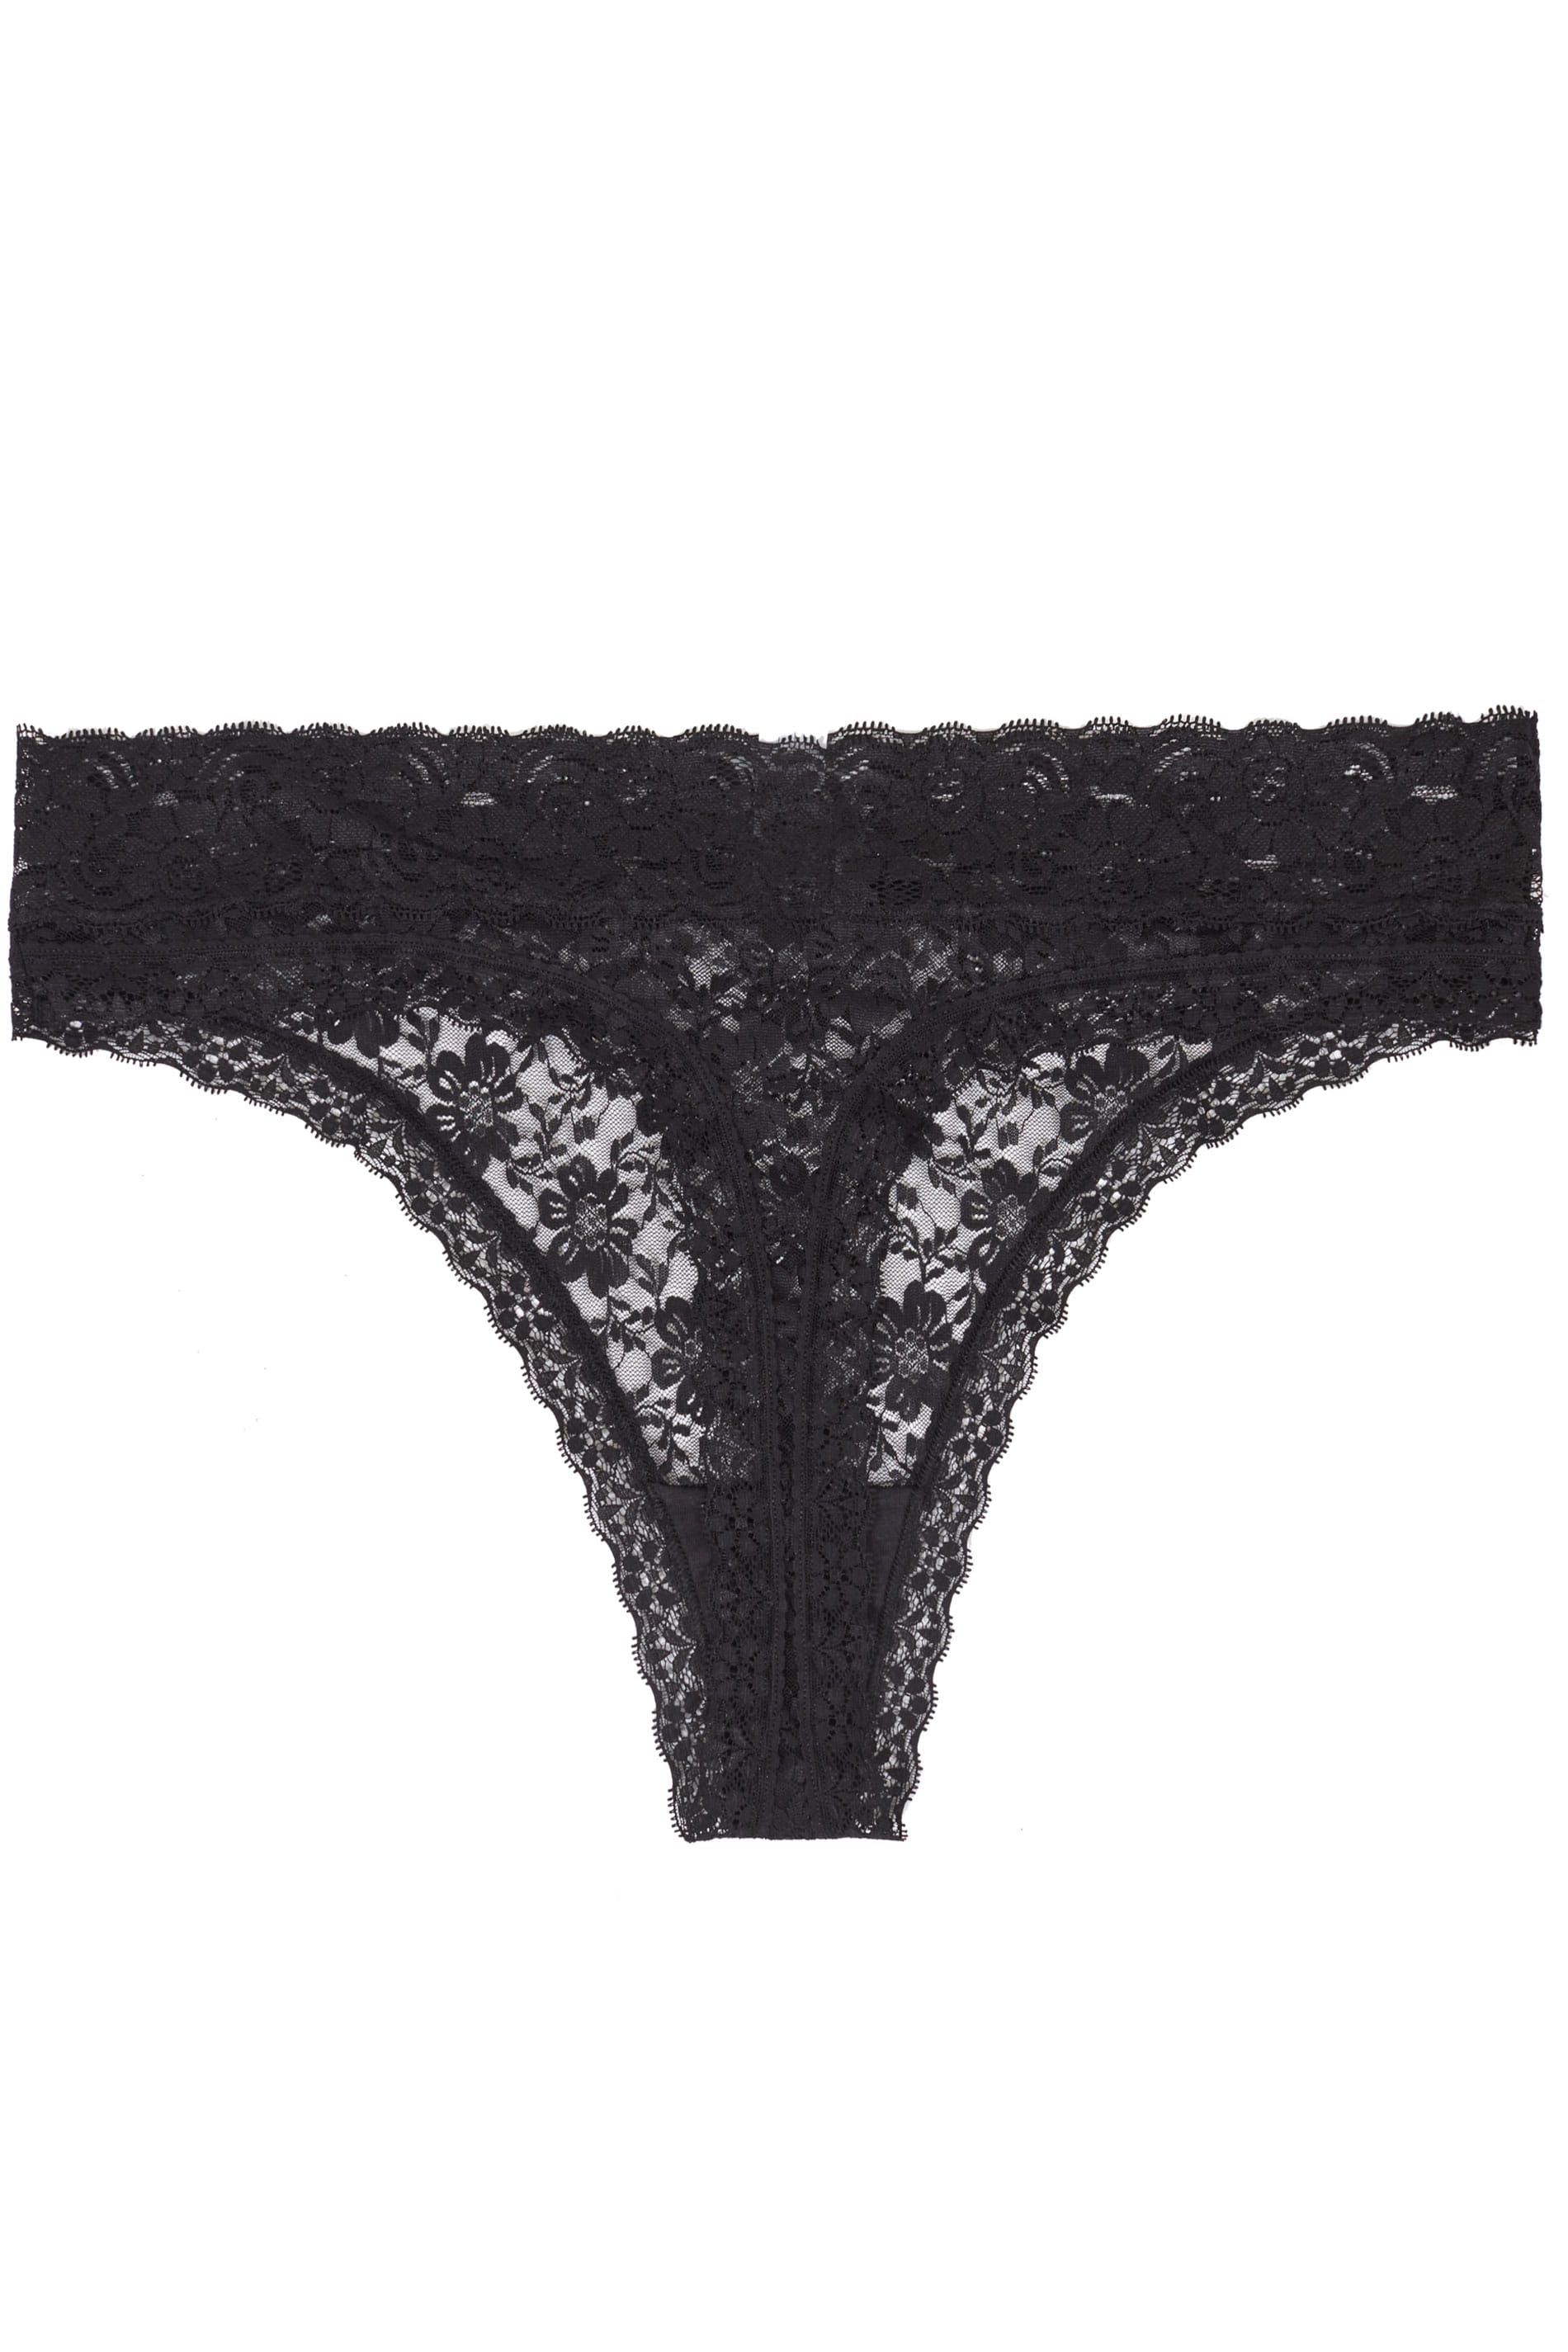 Plus Size Black Lace Thong Sizes 16 To 32 Yours Clothing